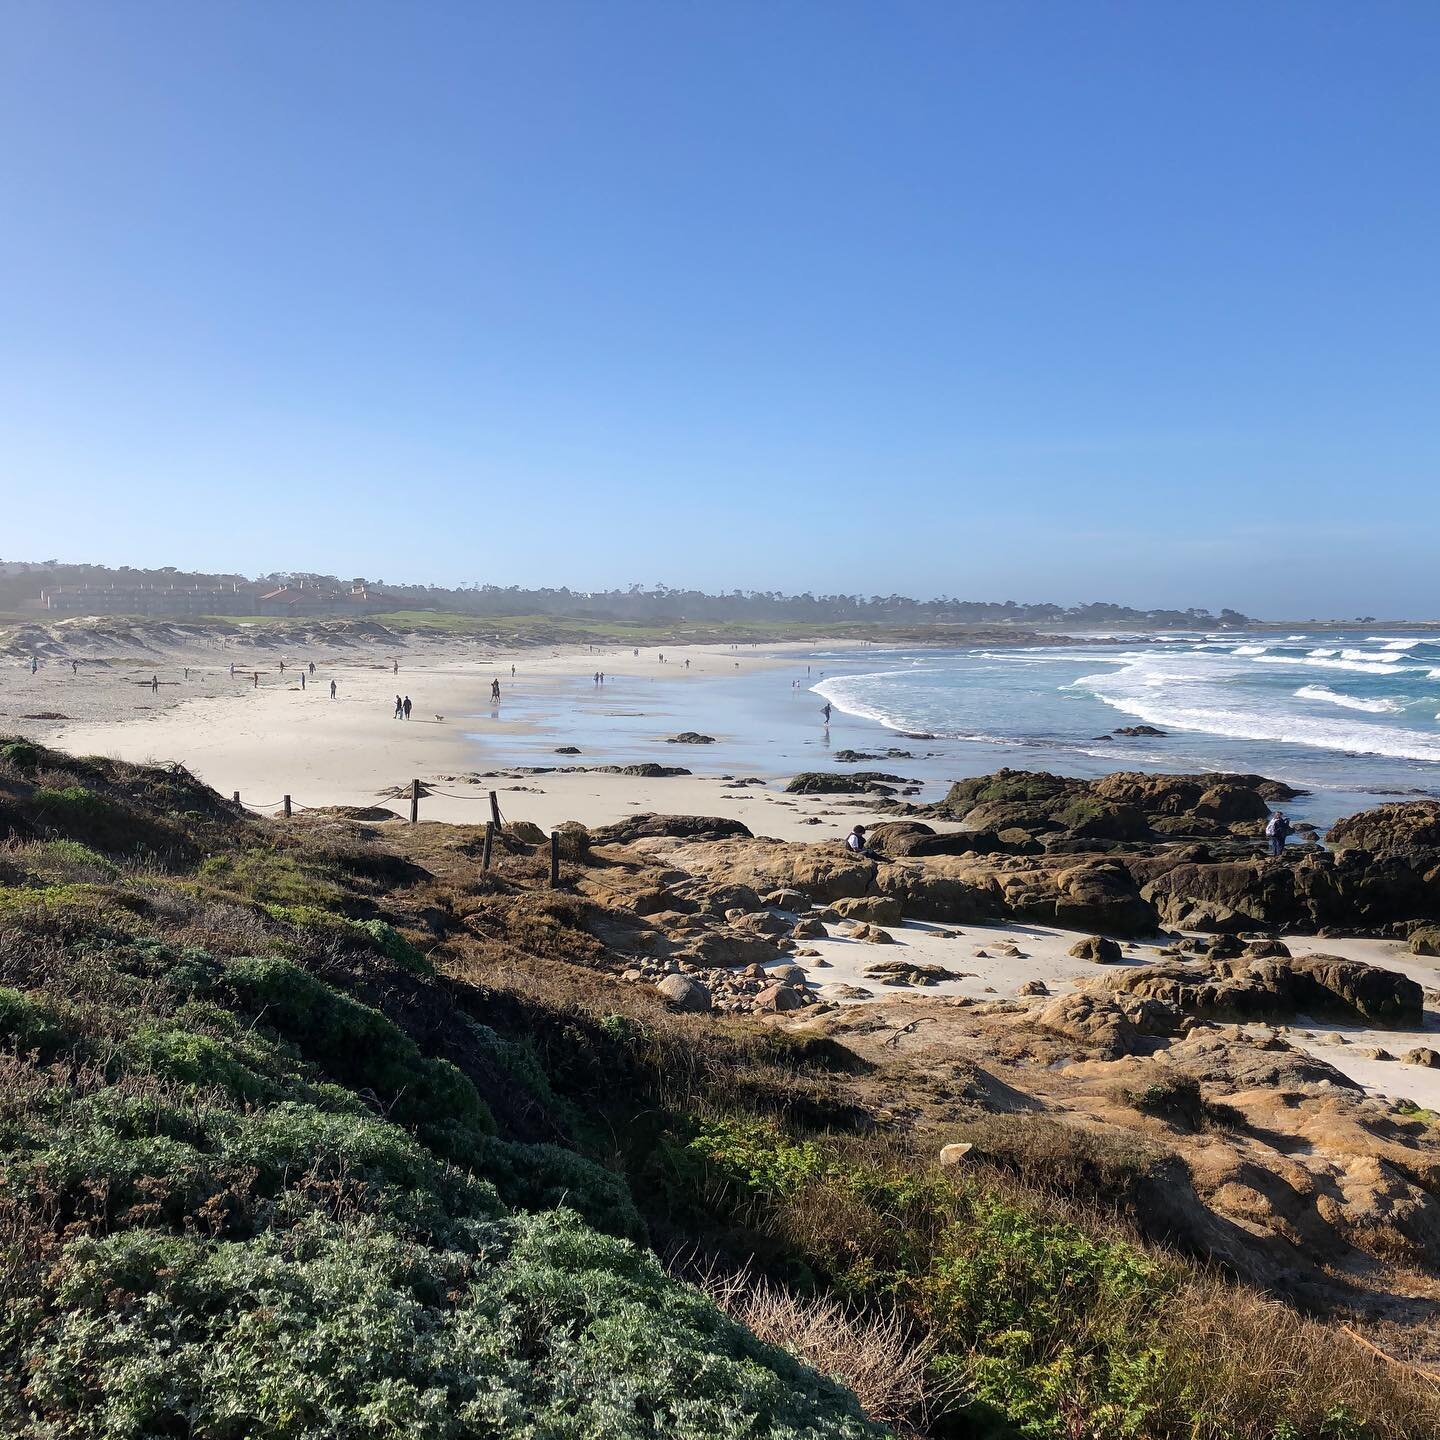 Asilomar Beach. Truly magnificent trail through tide pools and sand dunes.